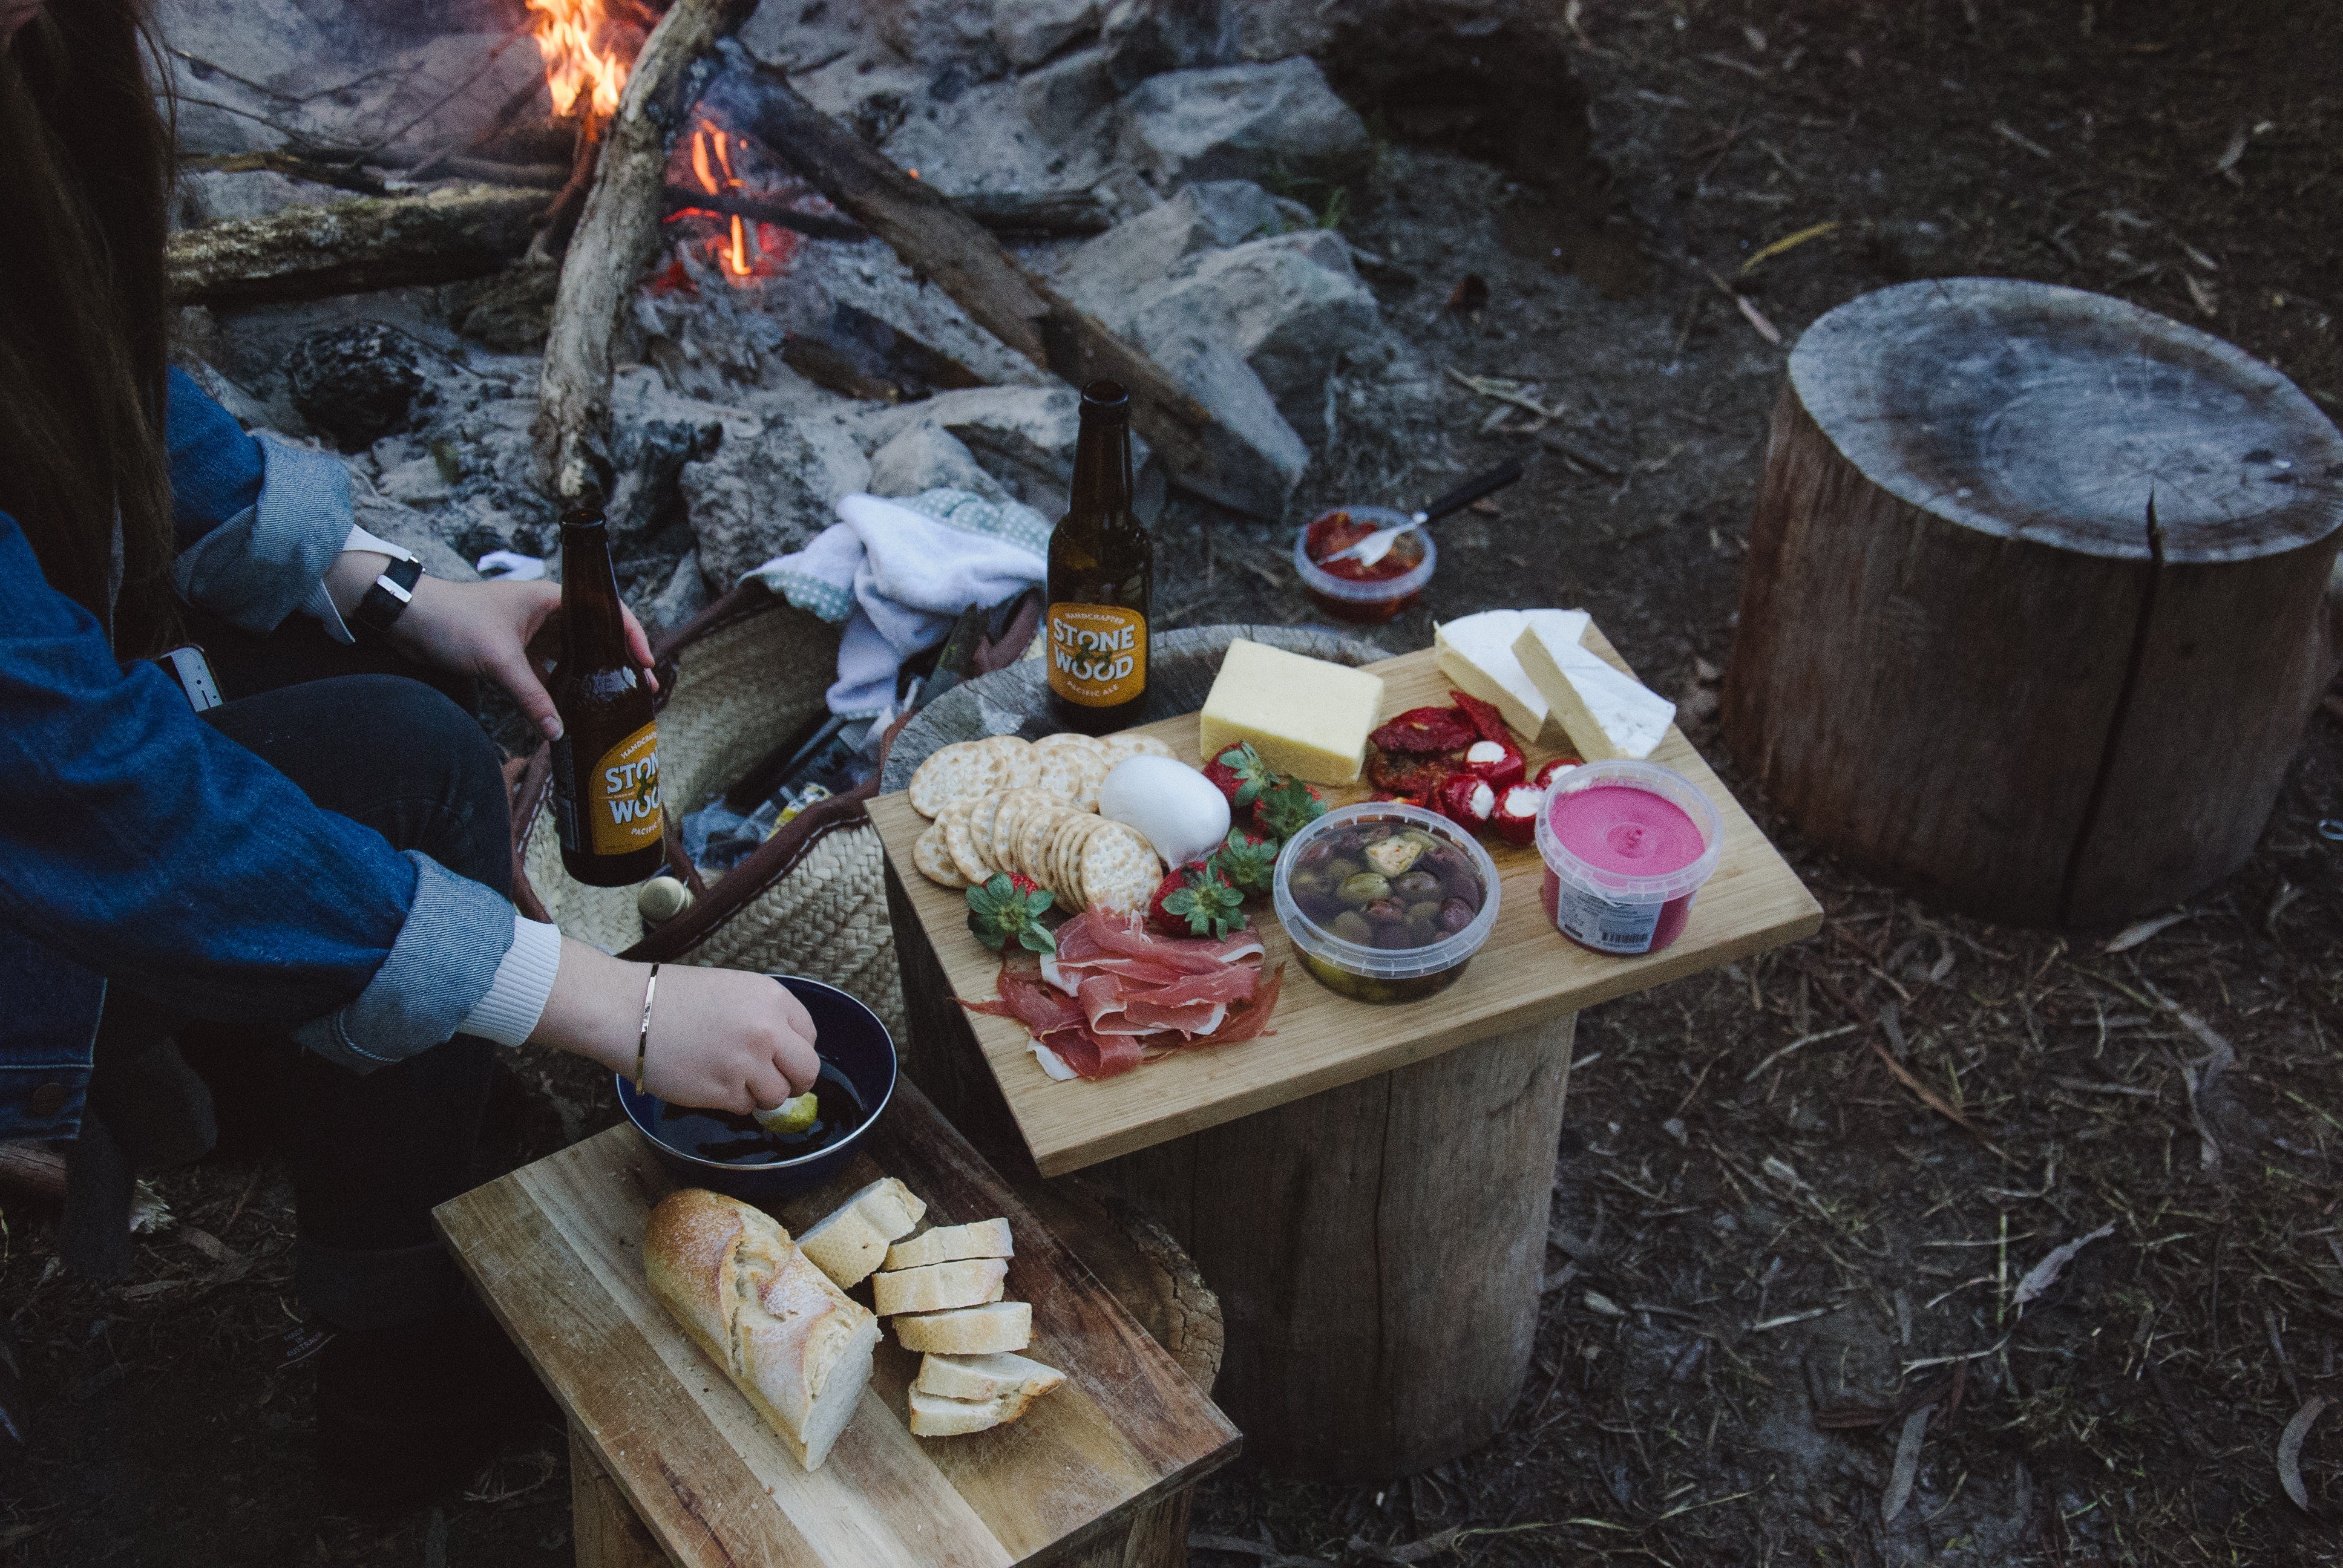 Delicious Camping Food: A Bread and Cheese Platter Next to the Fire